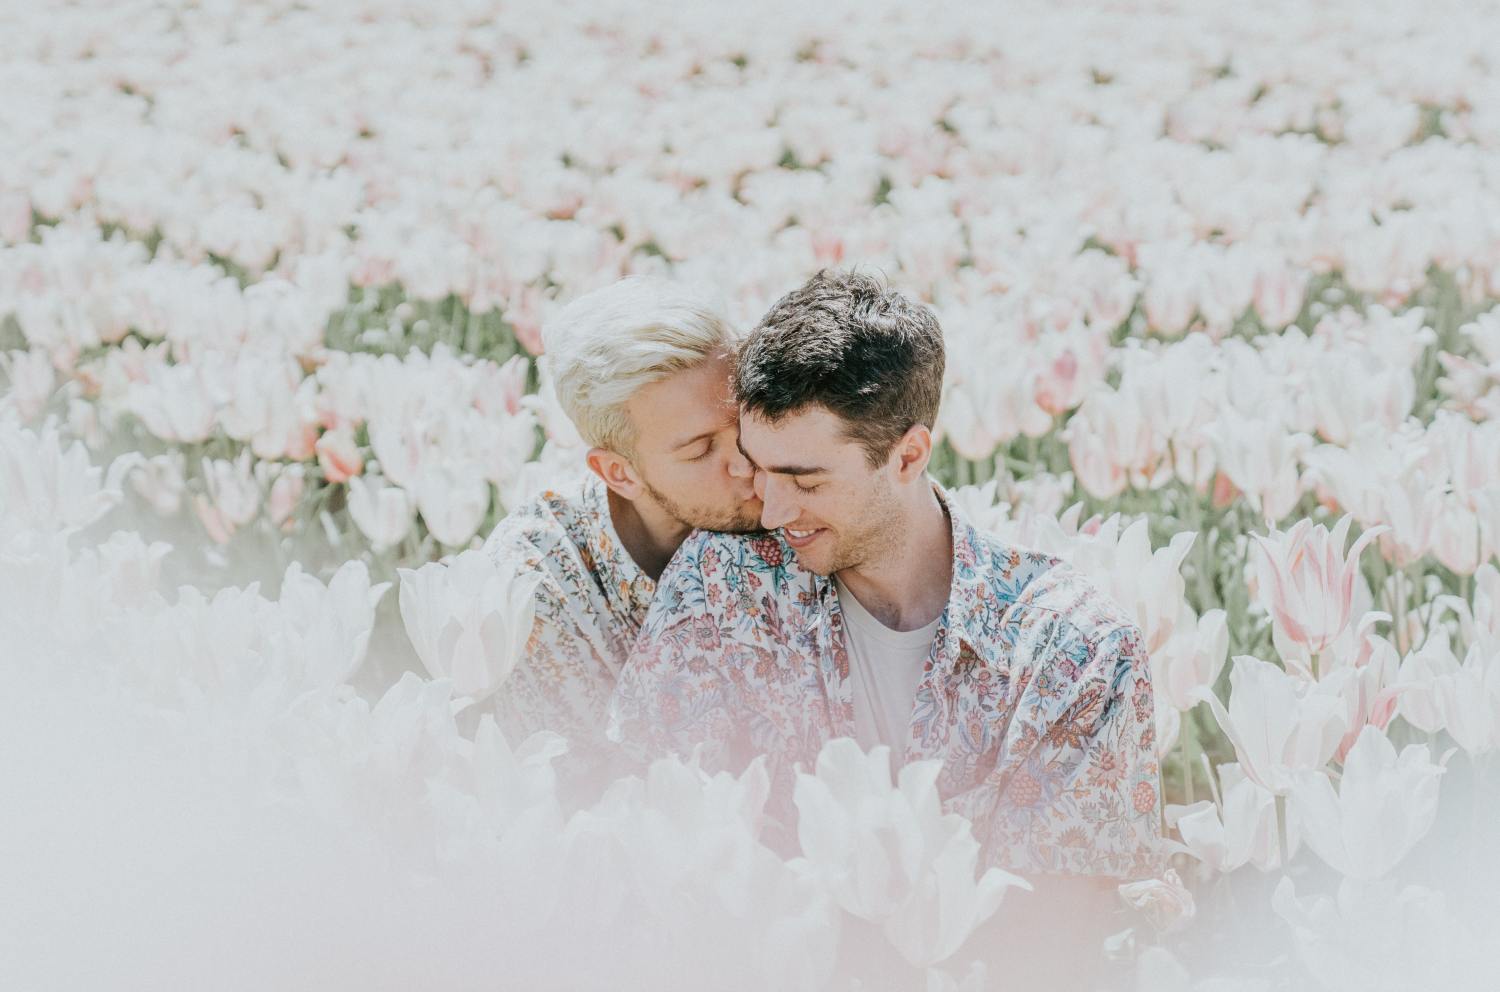 37 Ways To Make A Libra Man Fall In Love With You